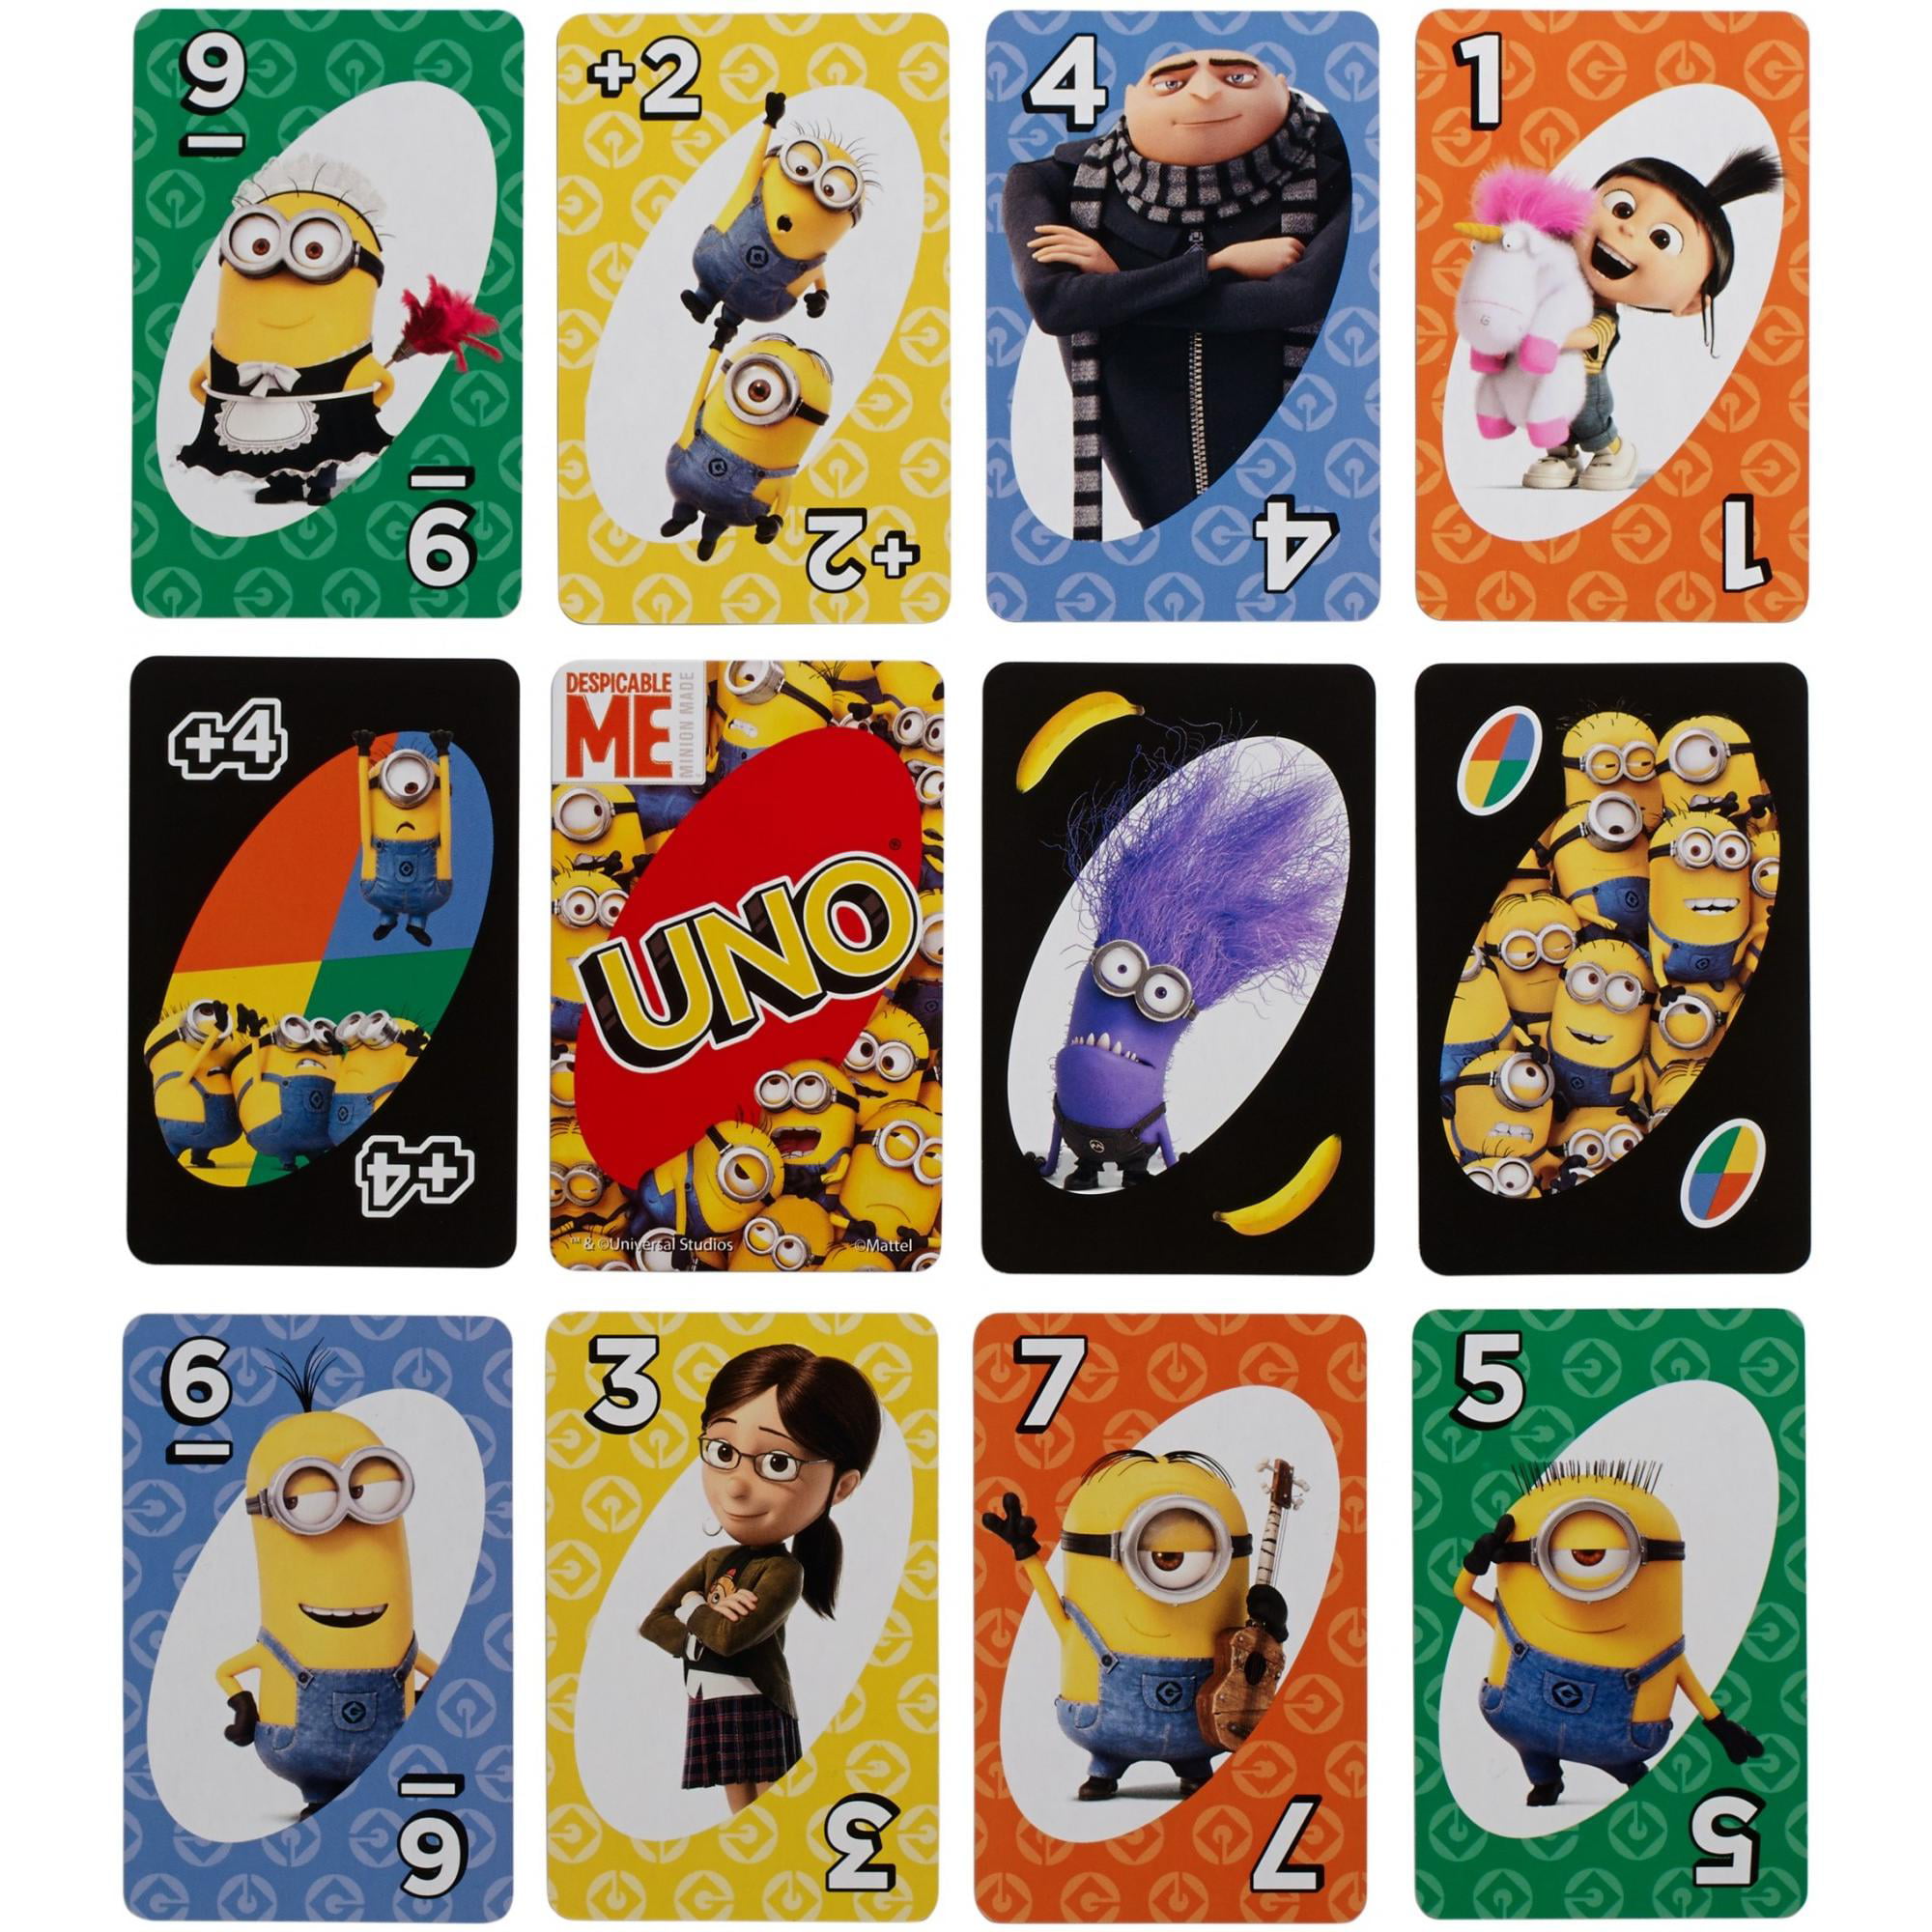 Minions UNO Card Game Travel Kids Christmas Toy Gift Stocking Filler Pressie 